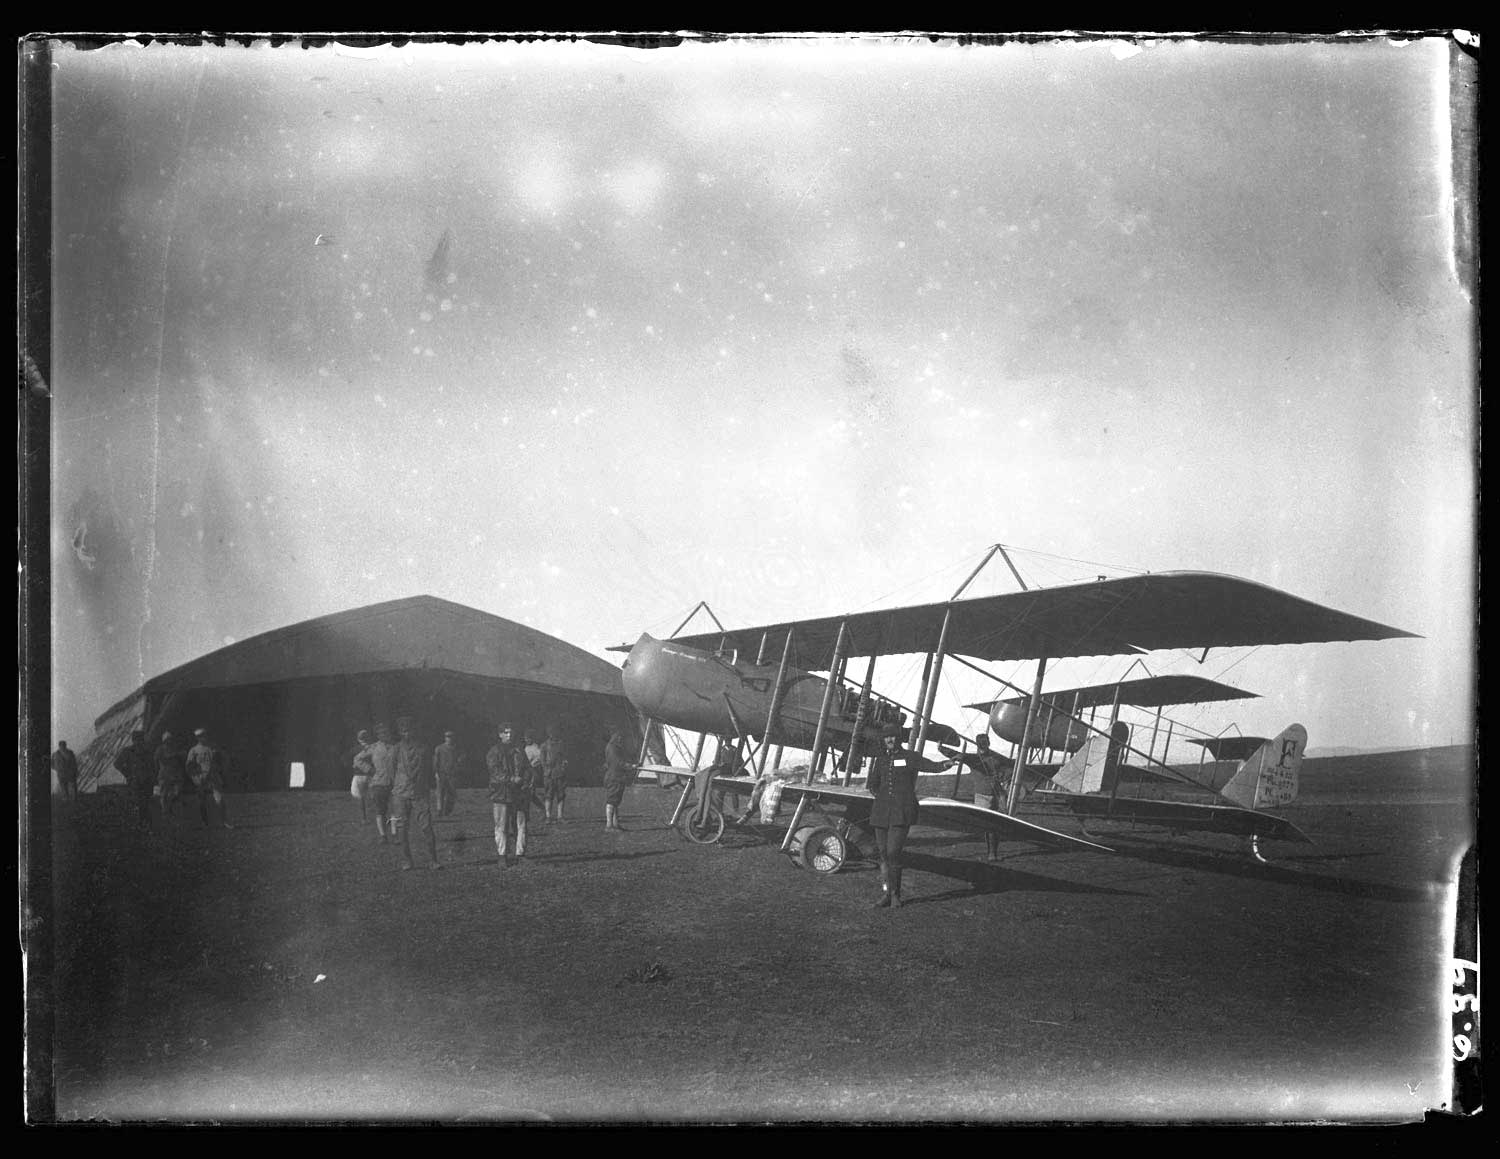 Aeroport Ibn Battouta de Tanger - A group of engineers and laborers posed by an airplane at the Tangier airport